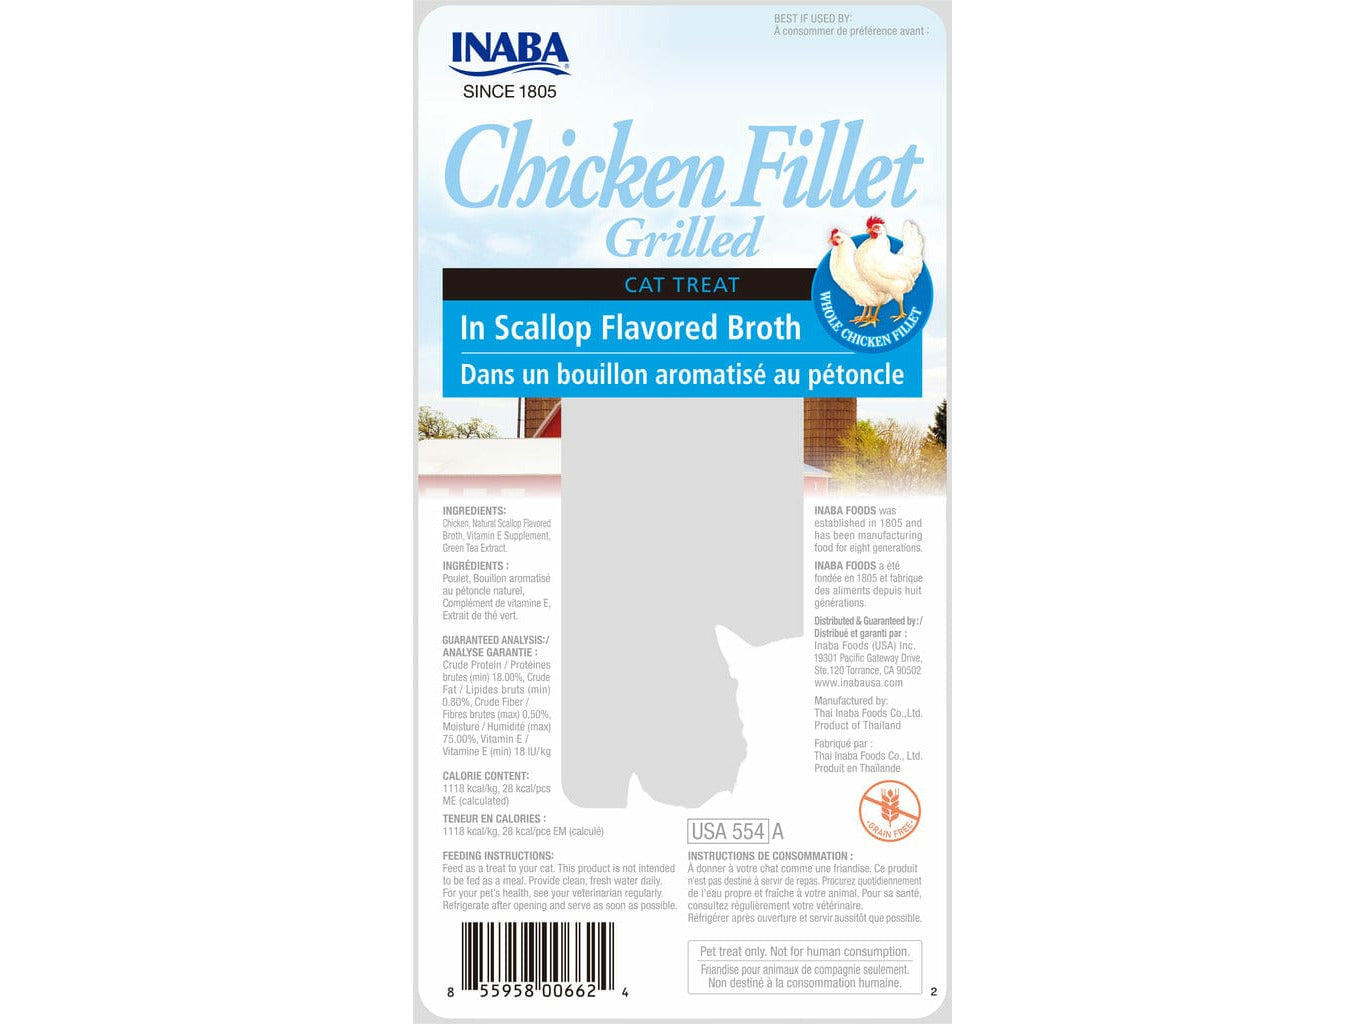 Scallop Flavored Broth (INABA Grilled Chicken Fillet) 15 g/pack